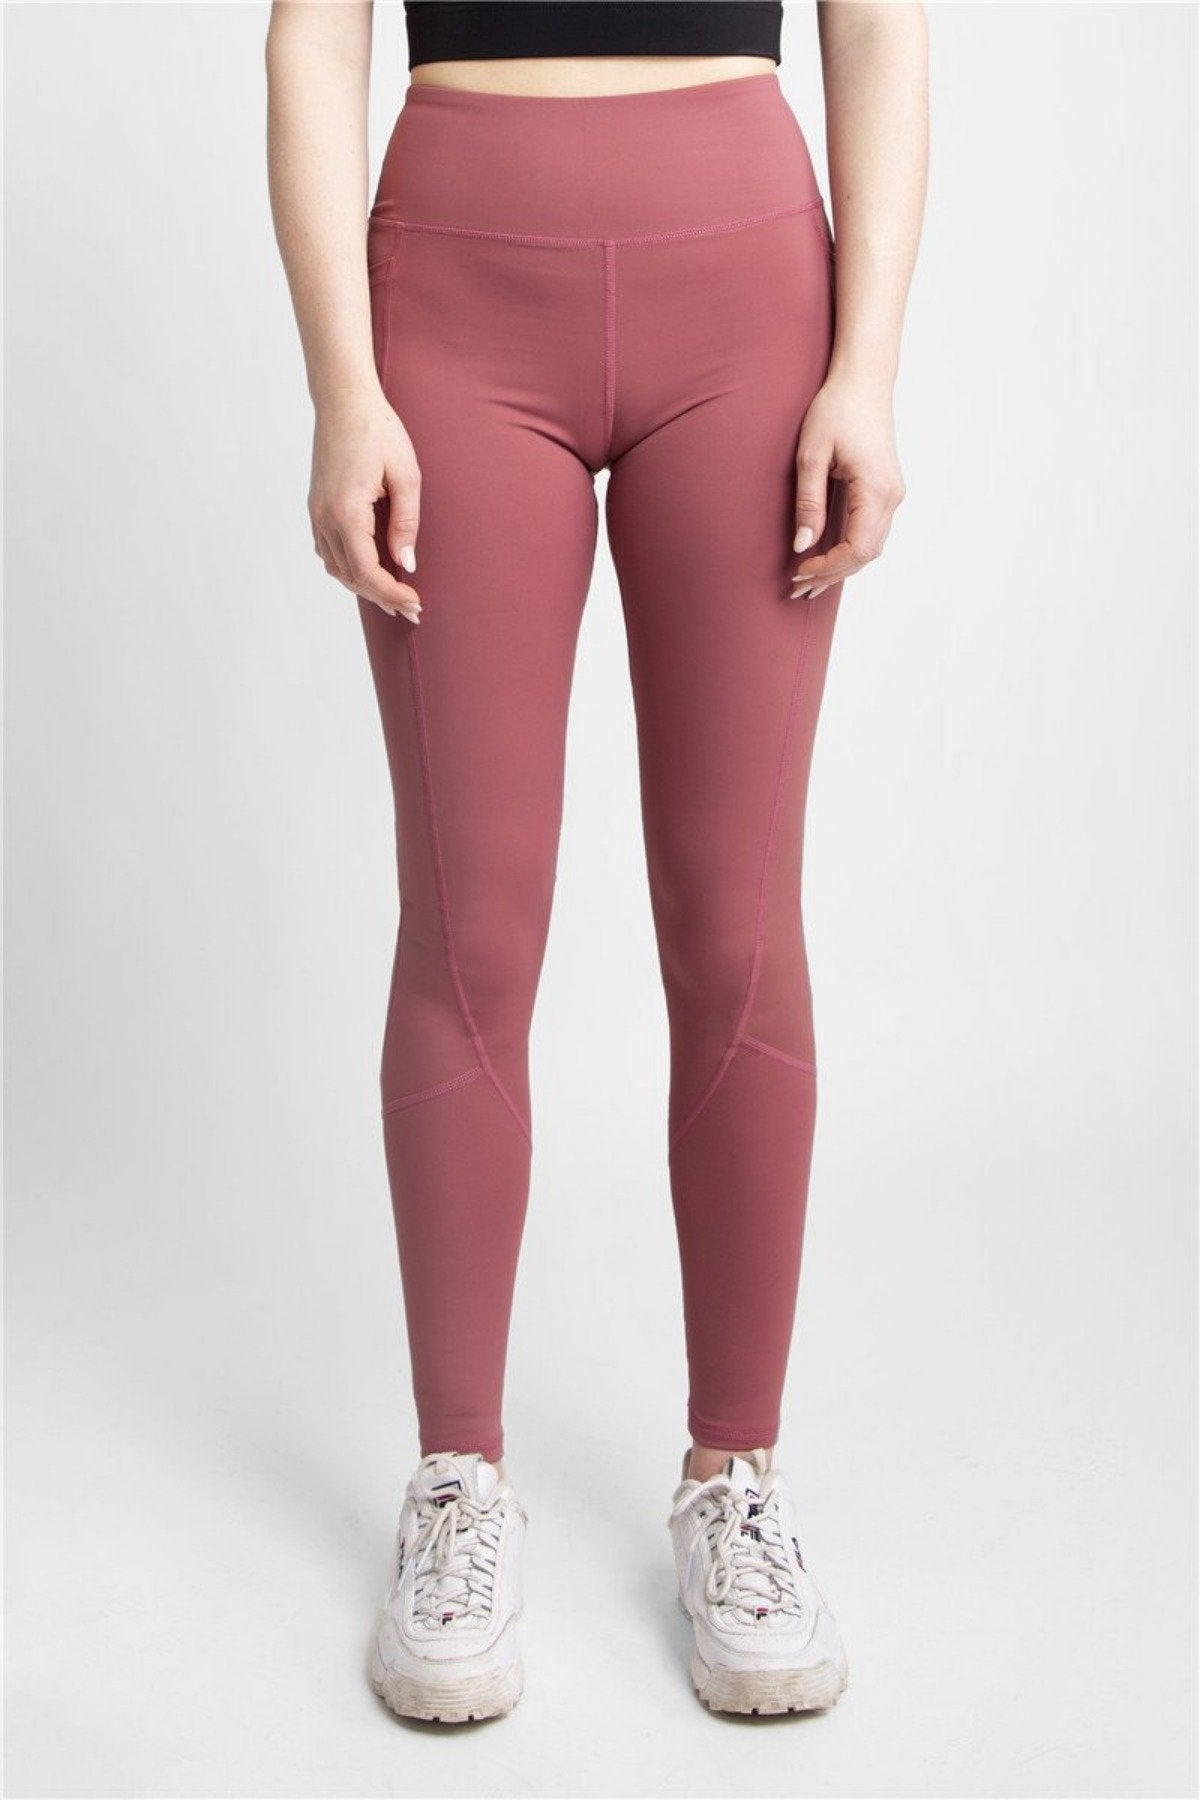 Solid Color High - Rise Tights W/ Stash Pockets